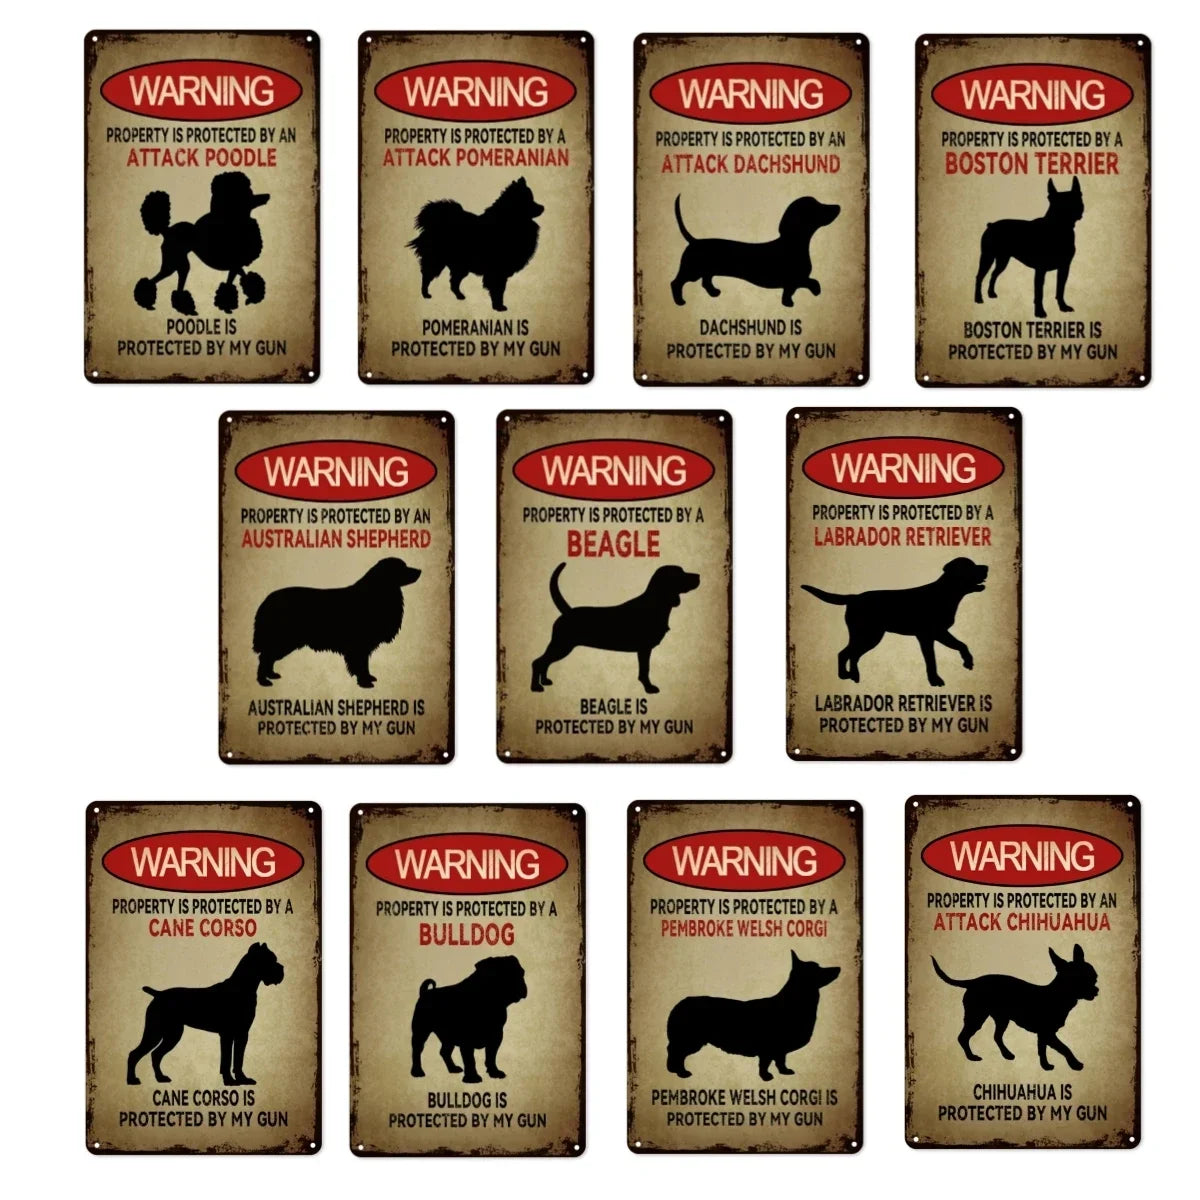 1pcs Vintage Funny Dog Metal Poster,Aluminum Warning Property Protected by Tin Sign,Wall Decor Art Poster Dog Lovers Gift